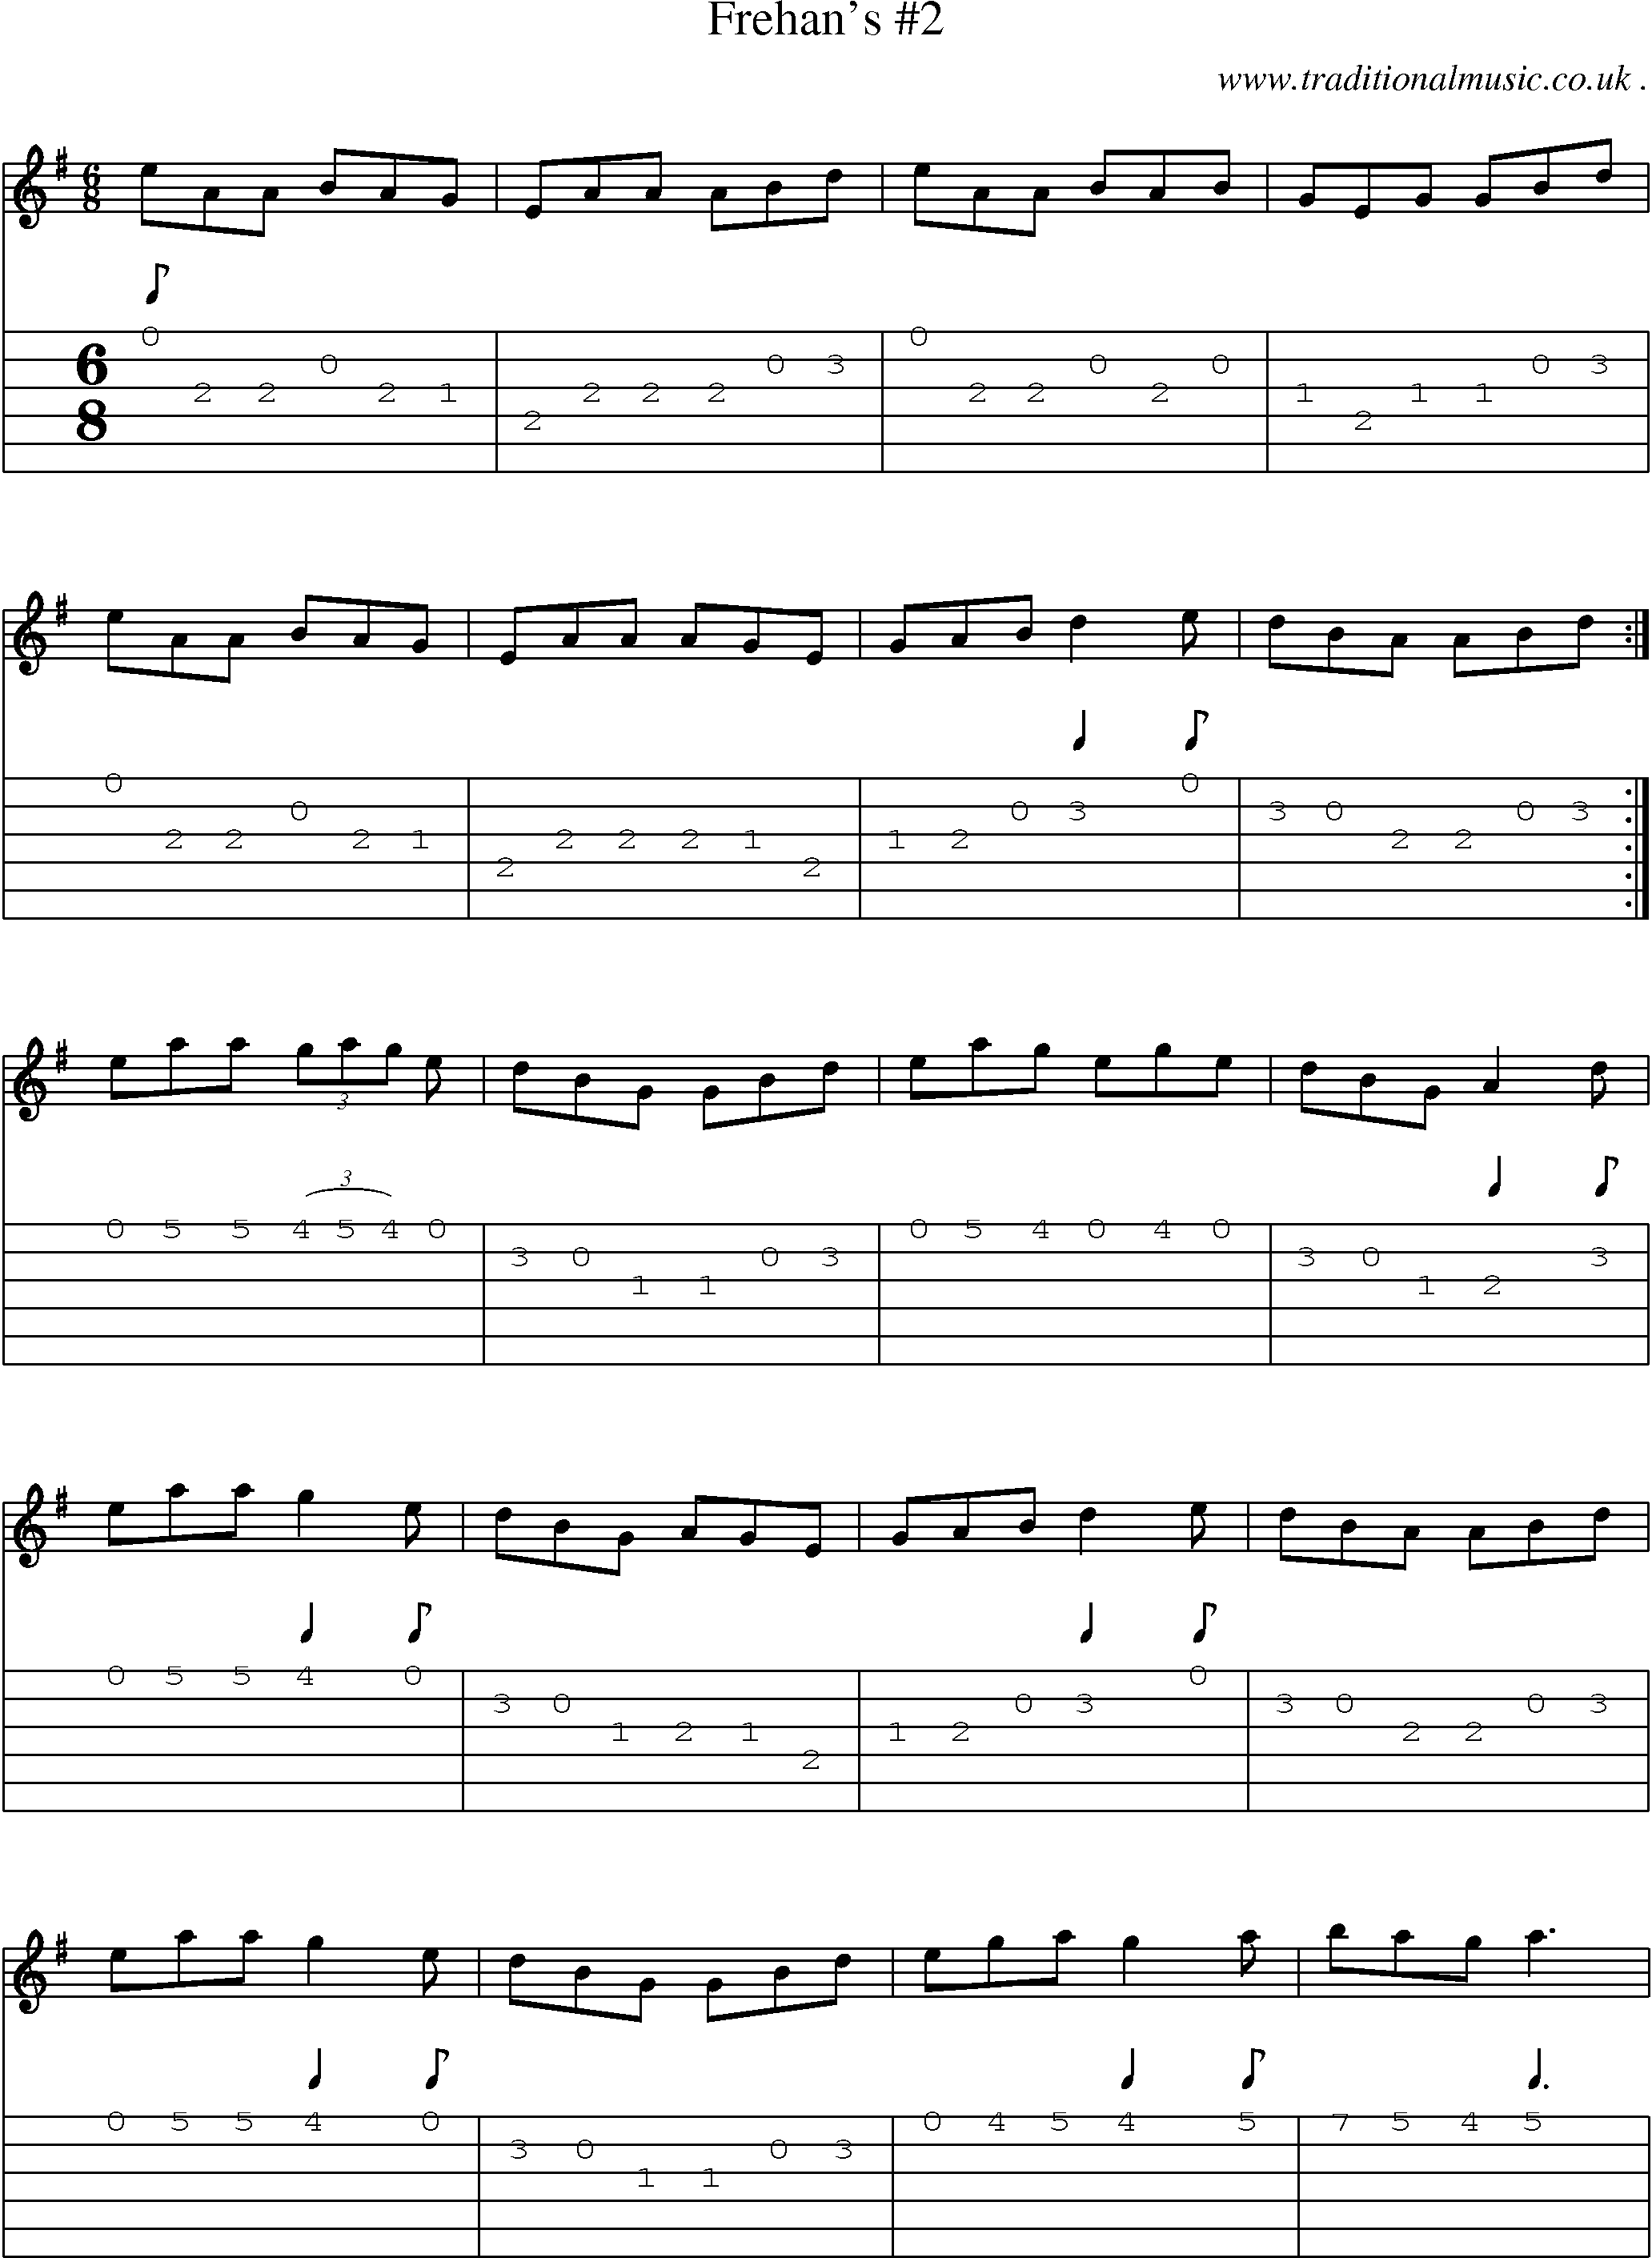 Sheet-Music and Guitar Tabs for Frehans 2